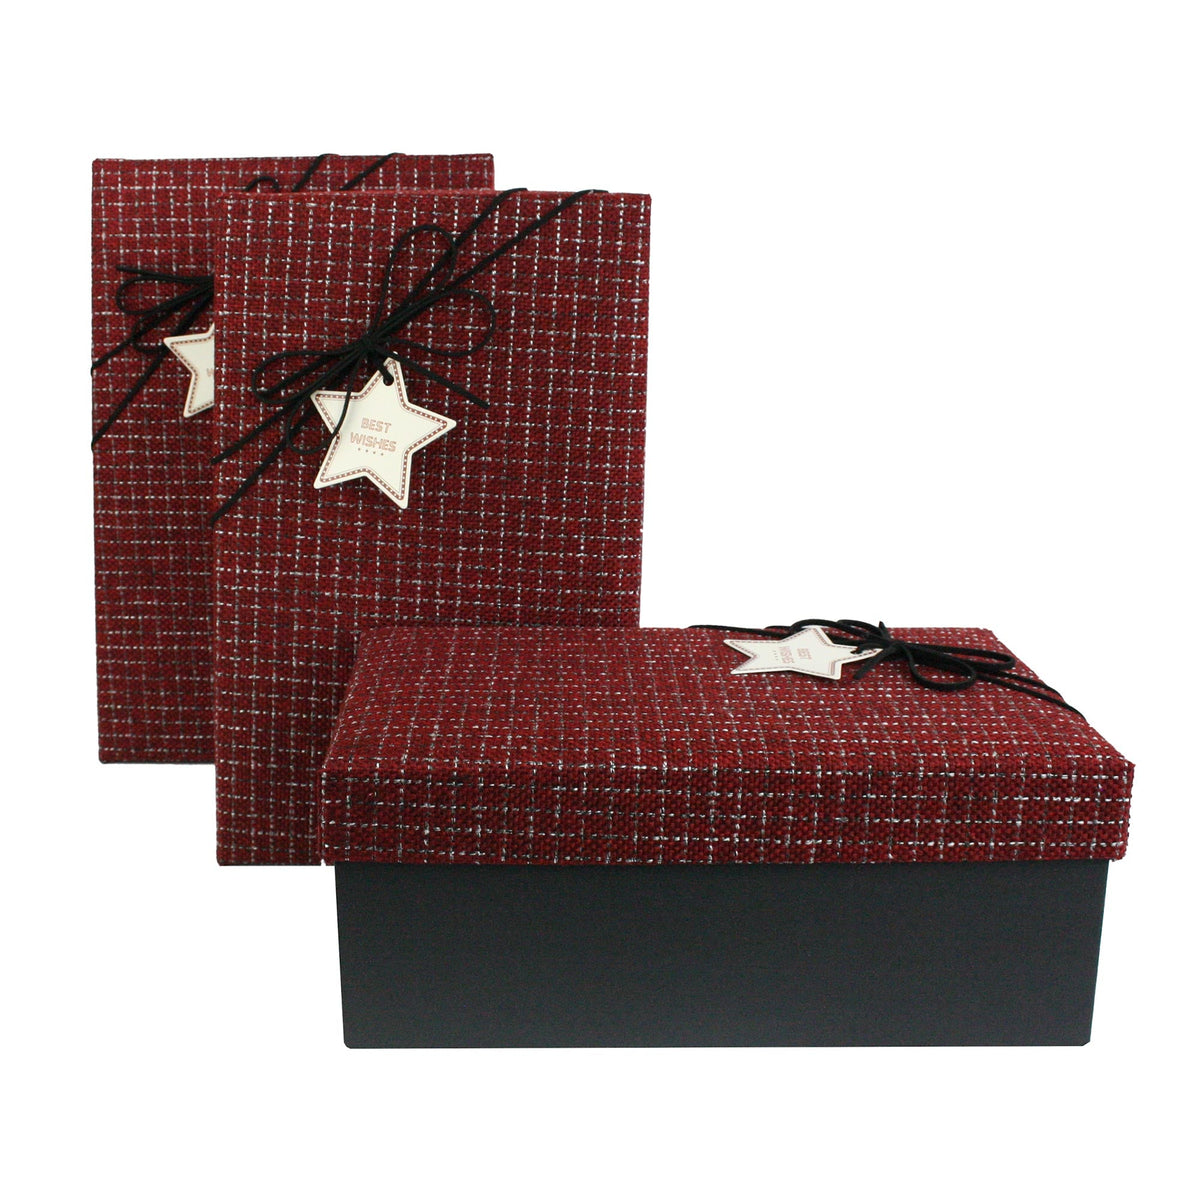 Set of 3 Black with Suede Decorative Ribbon Gift Boxes